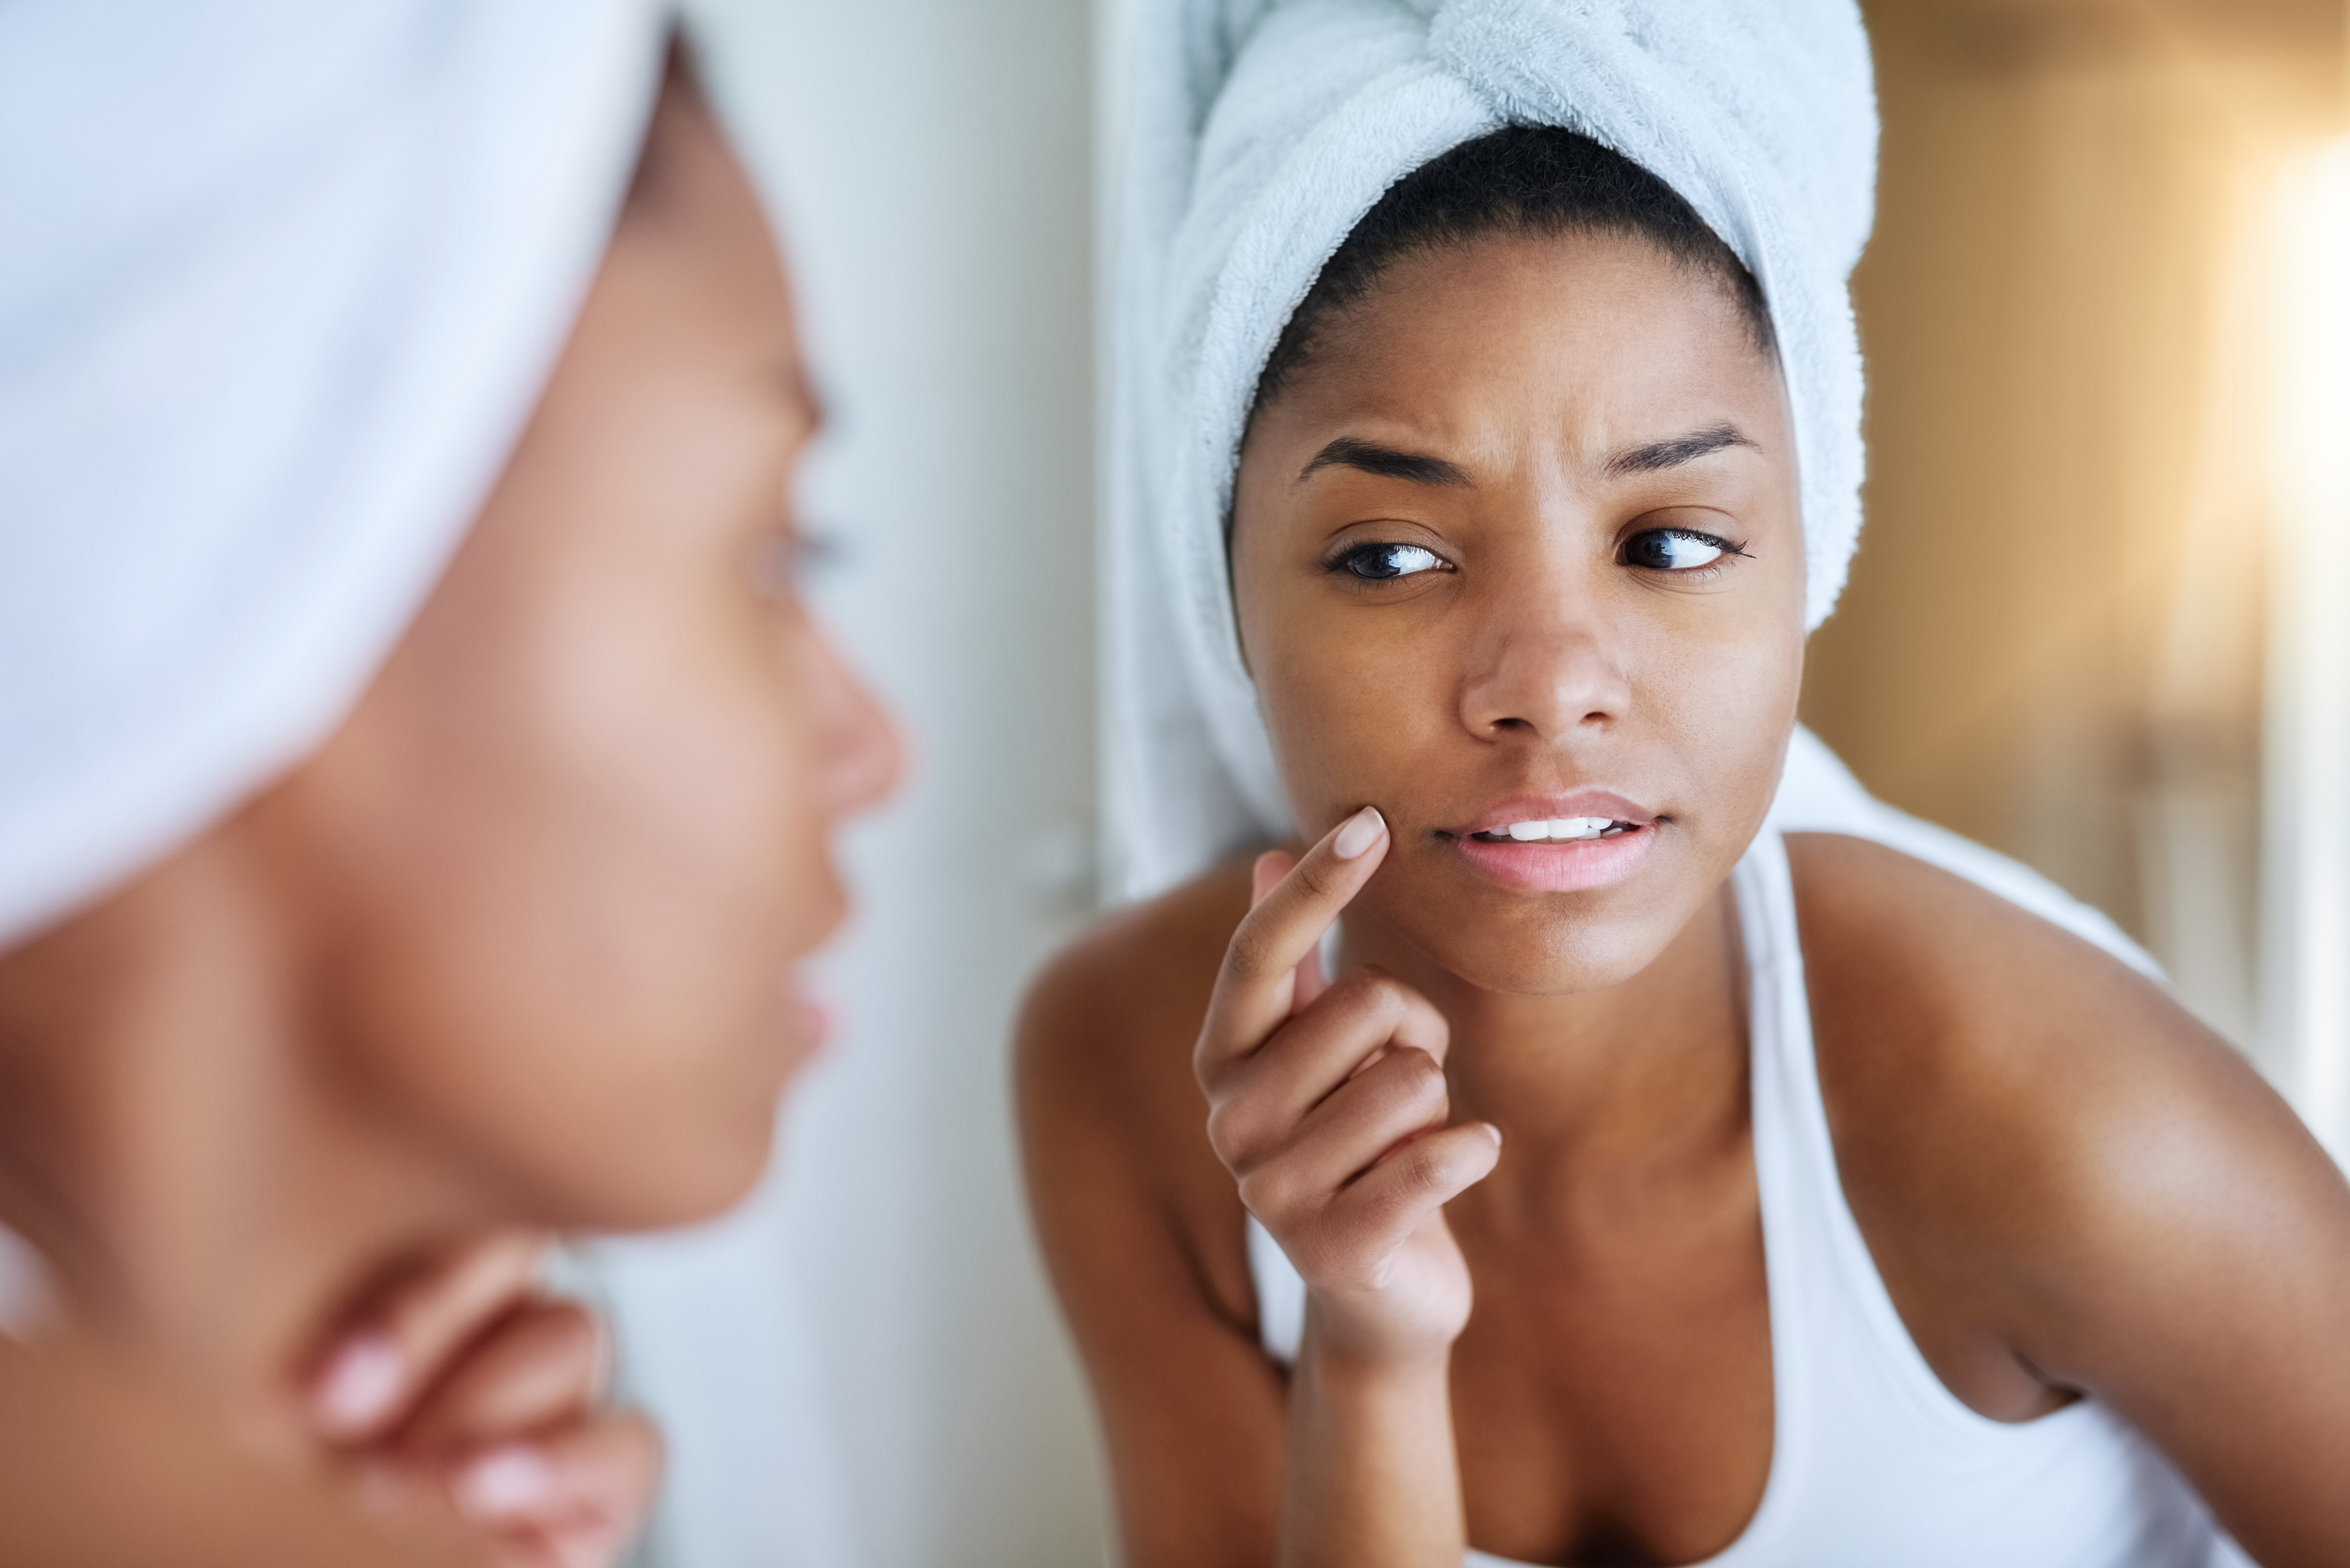 Here's The Best Way To Treat Acne Problems For Darker Complexions
